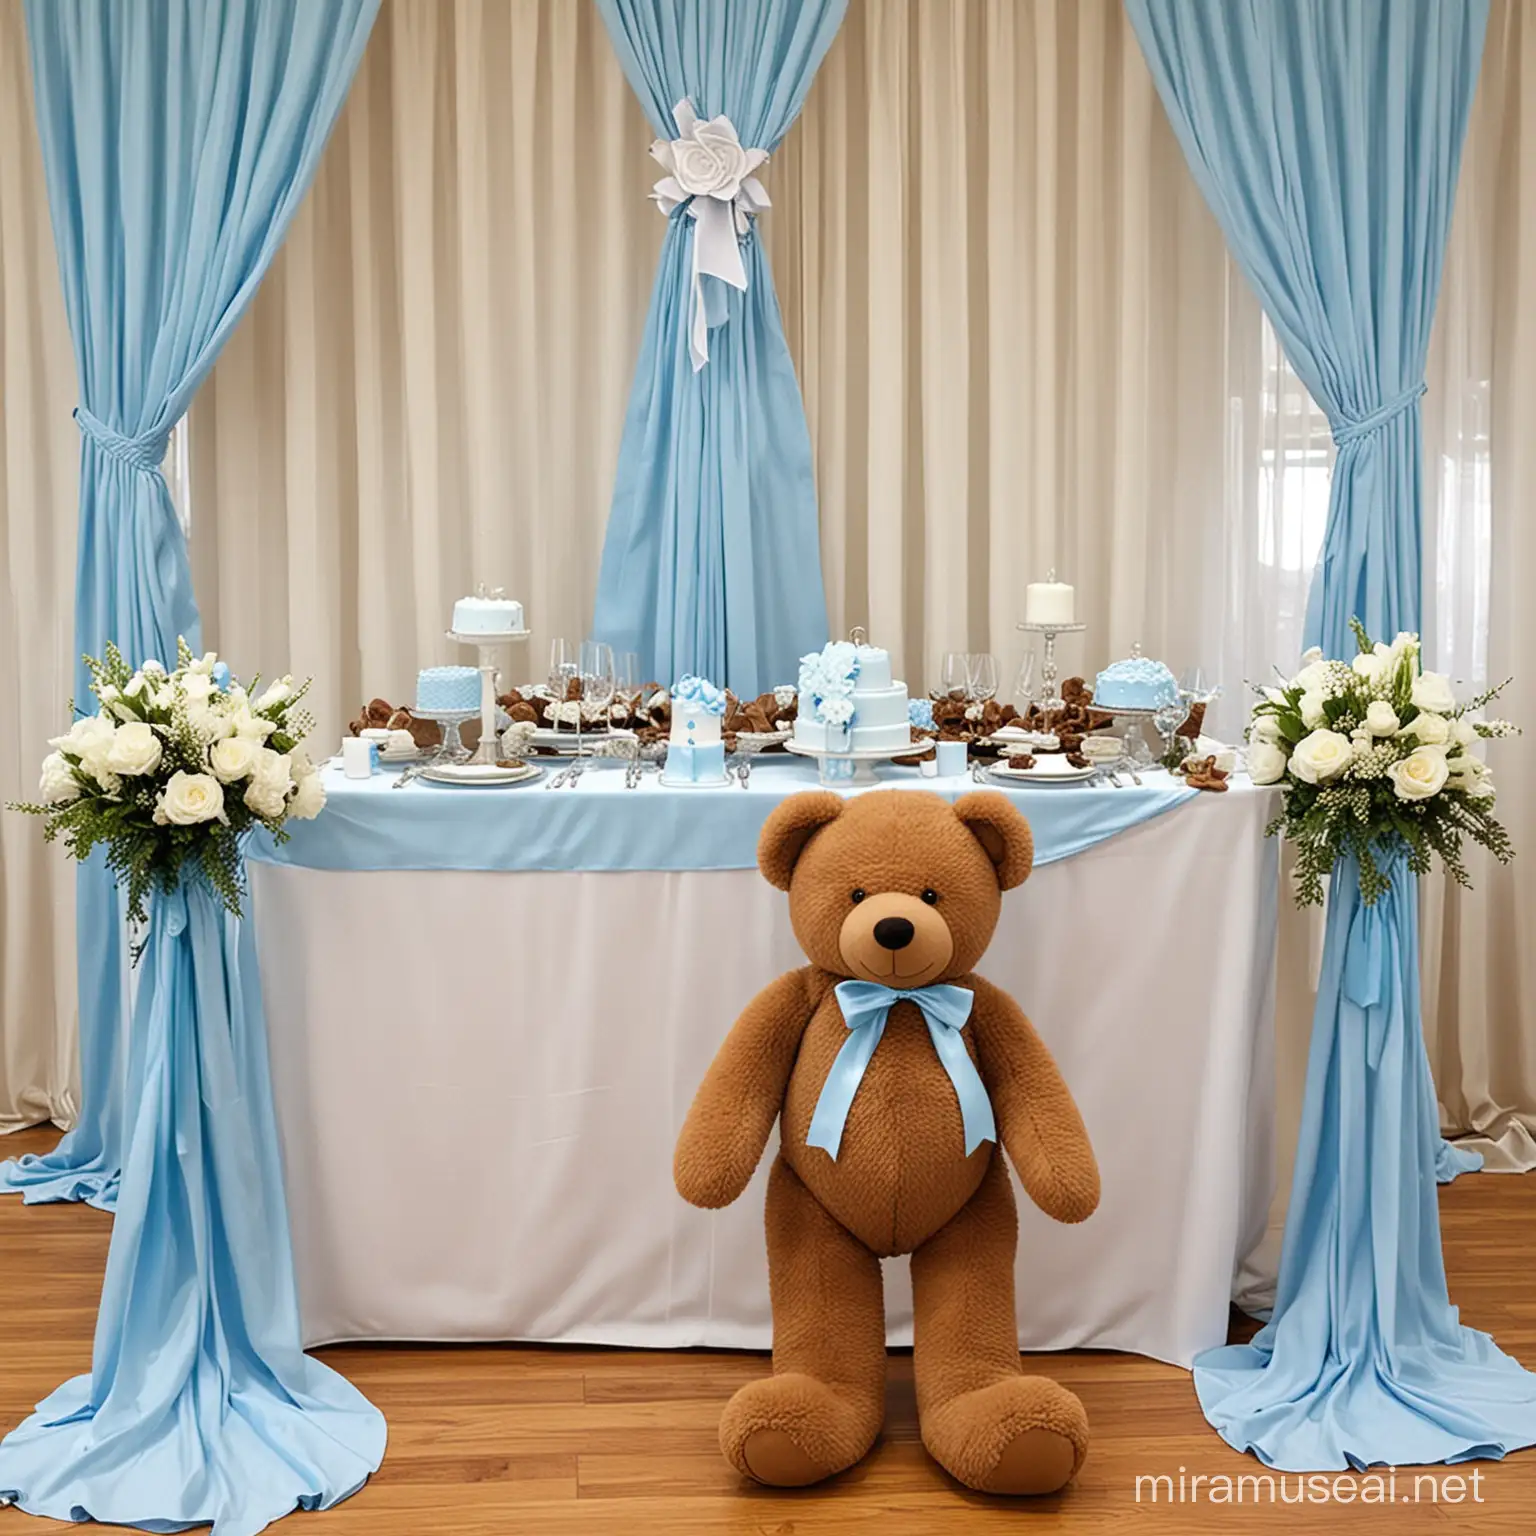 imagine white tablecloths with light blue runners, chairs with white covers and light blue sashes. brown teddy bear centerpieces and banner with its a boy across the curtain backdrop